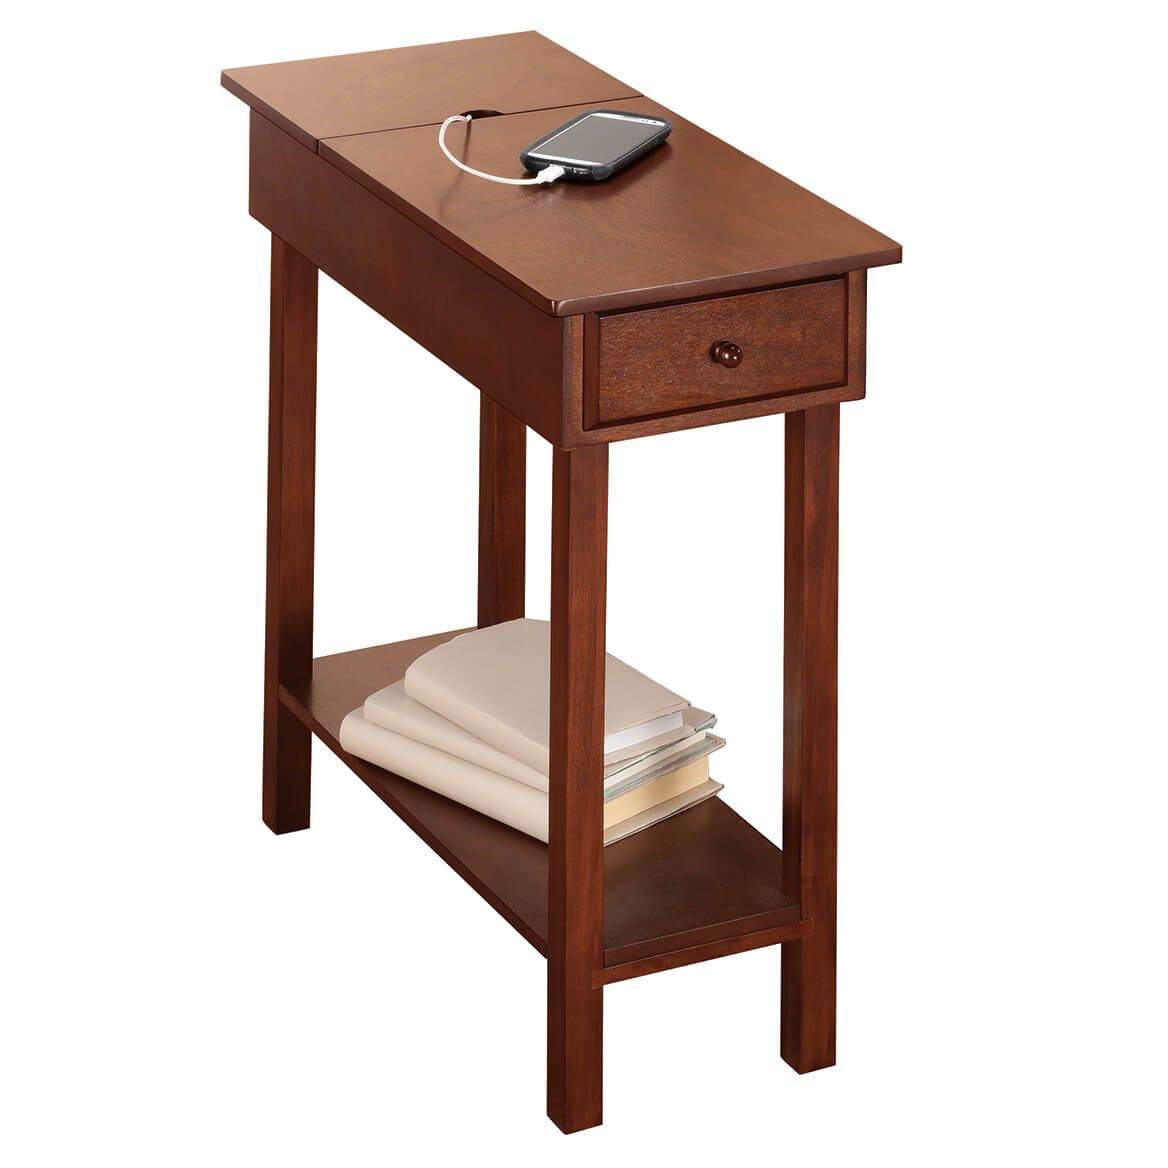 Chairside Table with USB Power Strip by OakRidge™ + '-' + 358129